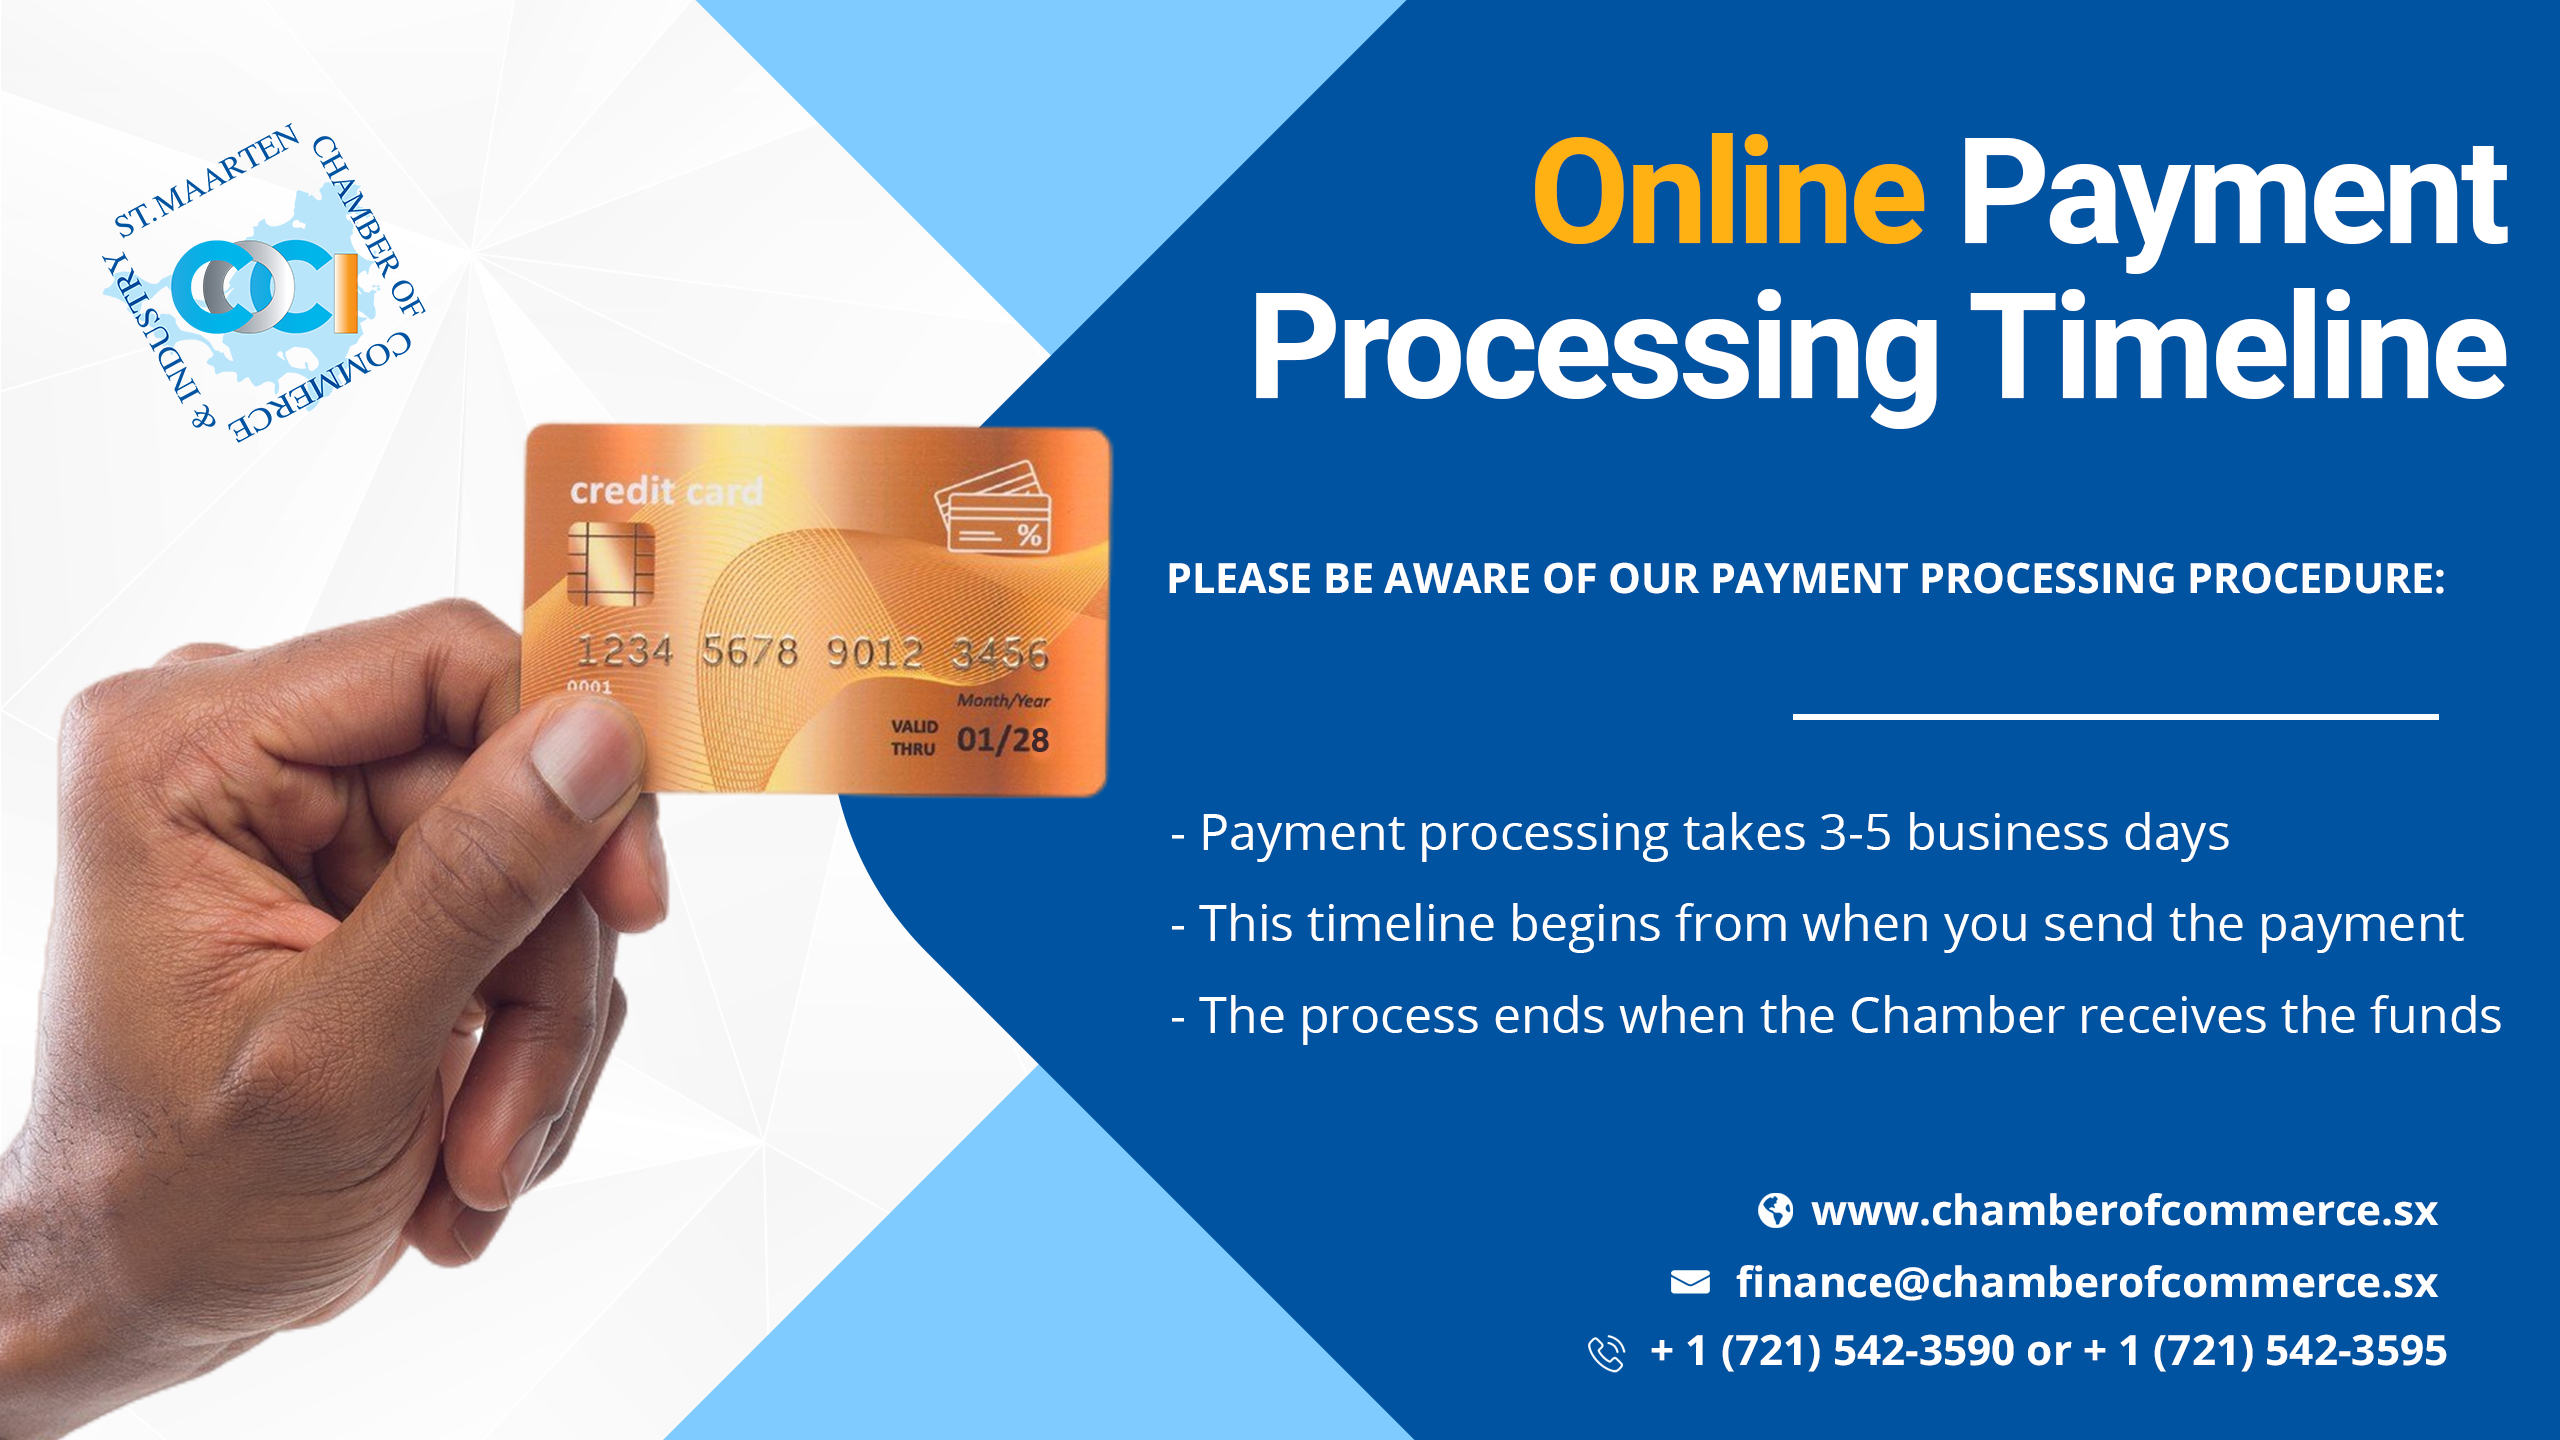 Online Payment Processing Timeline